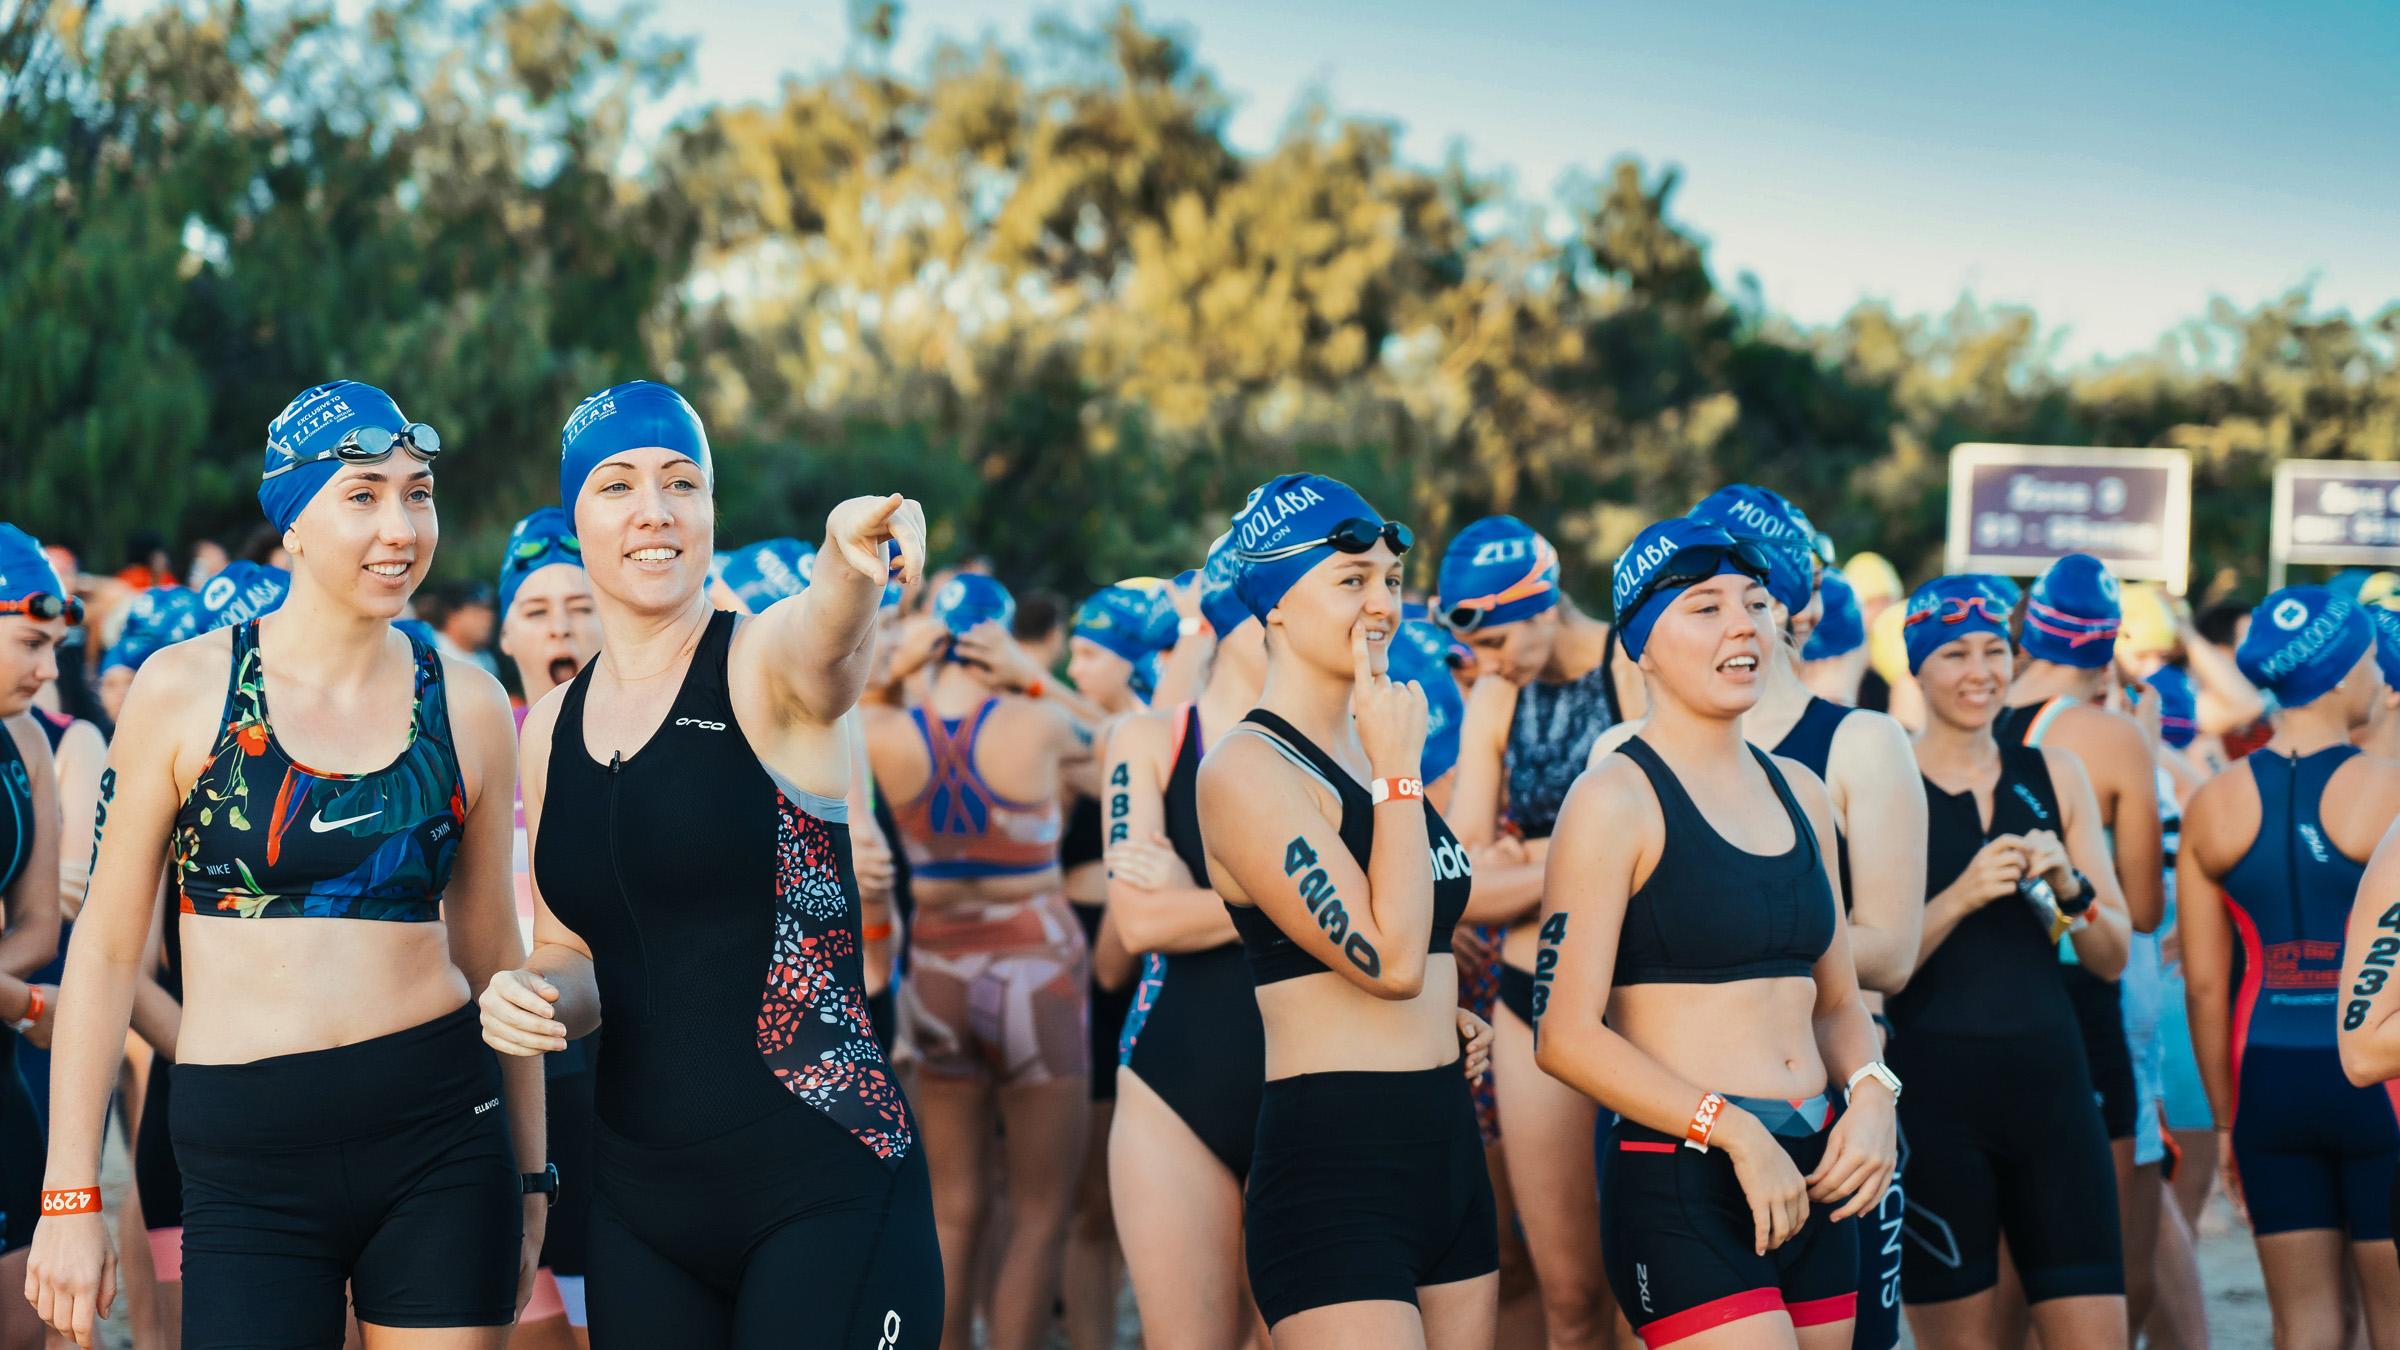 Crowd of swimmers wearing goggles and caps, standing together before a race